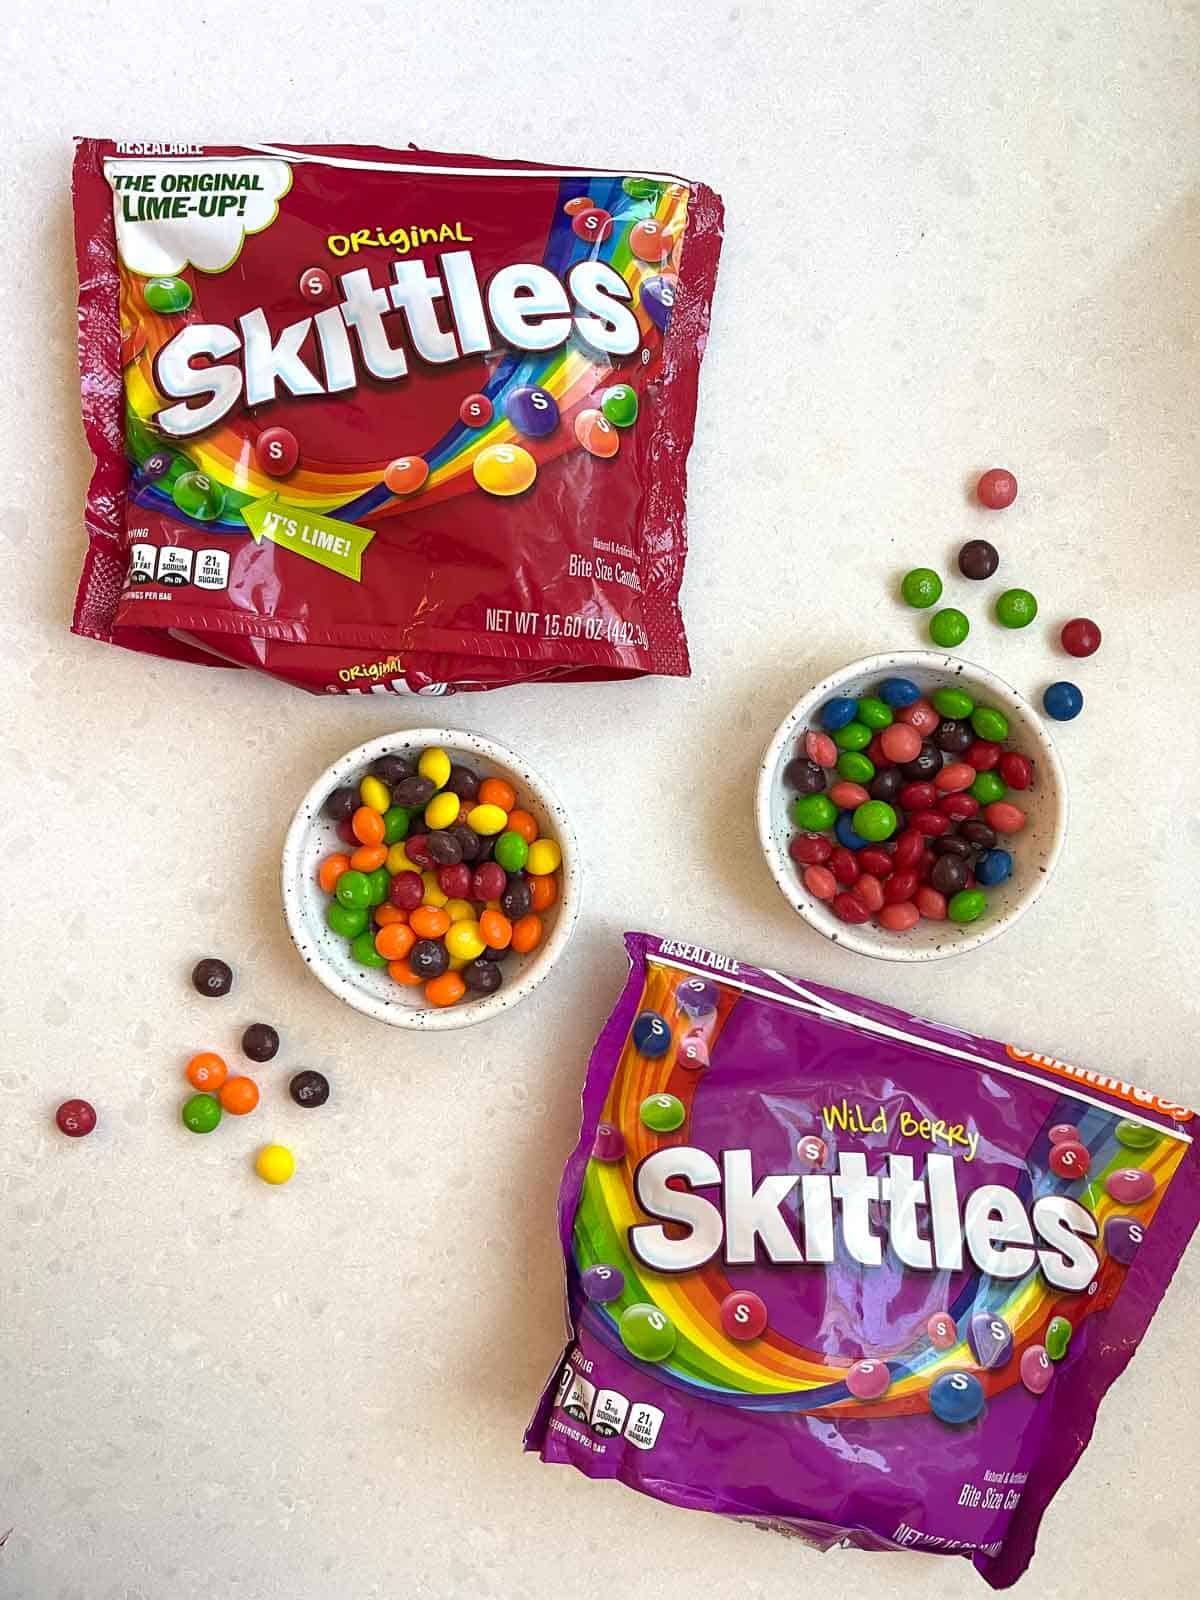 2 bags of skittles on white counter with 2 bowls of skittles